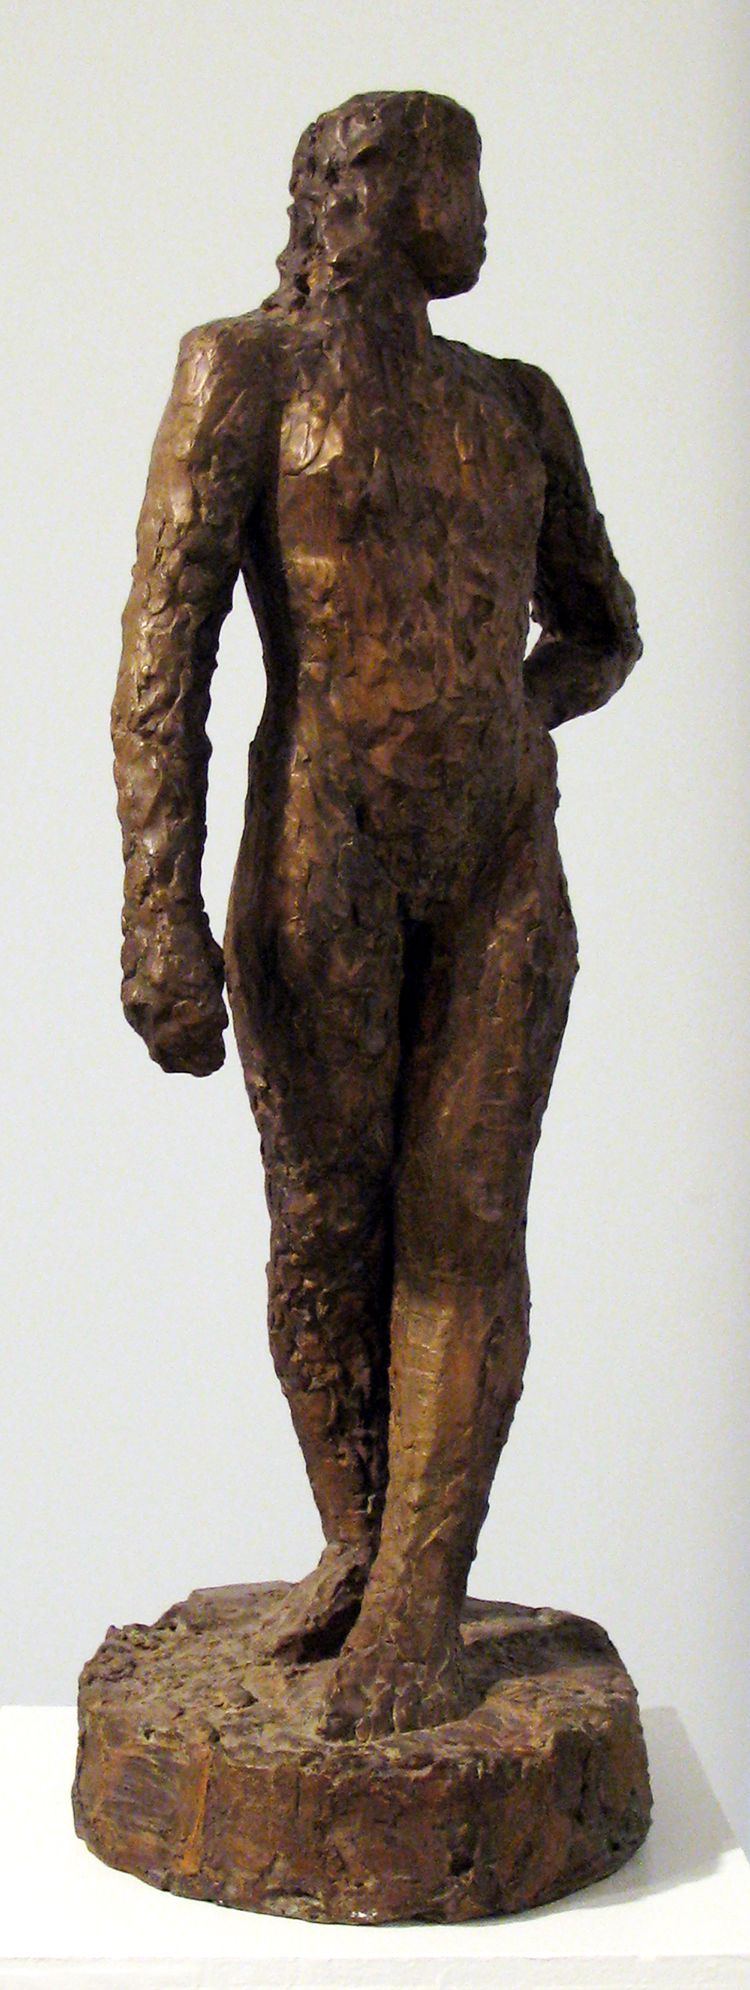 Lisbeth Nielsen, <i>Young Woman Moving</i>, 1989<br>Bronze. 105 cm (height)<br>Purchased 1990. Inv.nr. 1990-005. ©The artist